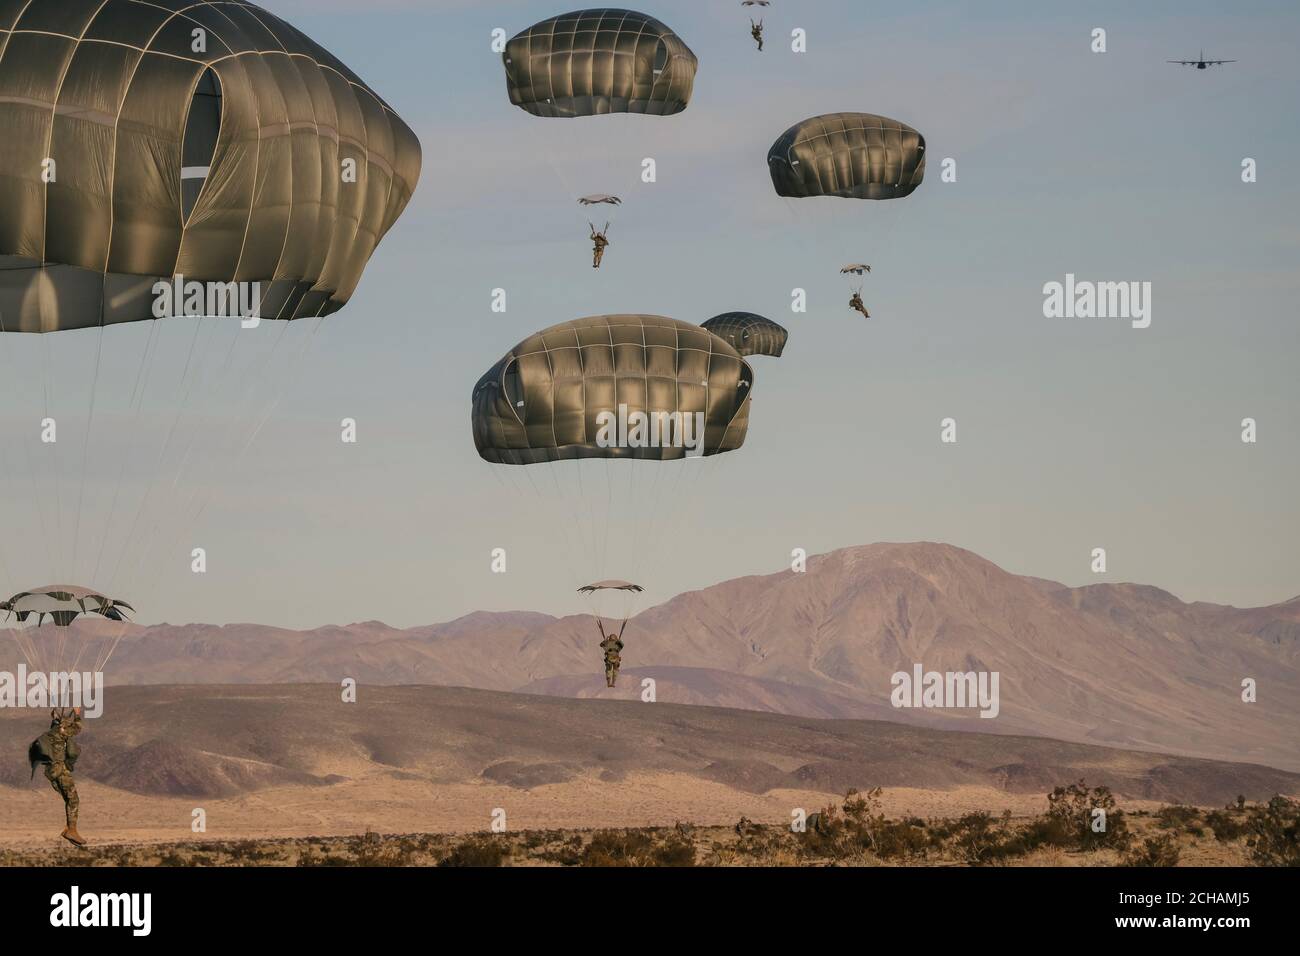 U.S. Army Reserve paratroopers from the 416th Civil Affairs Battalion (Airborne) conduct airborne operations at the National Training Center, Fort Irwin, Calif., Feb. 23, 2019. Soldiers who are assigned to airborne units must complete a parachute jump every three months to retain jump certification and proficiency. (U.S. Army Reserve photo by Master Sgt. Alec Appleton) Stock Photo